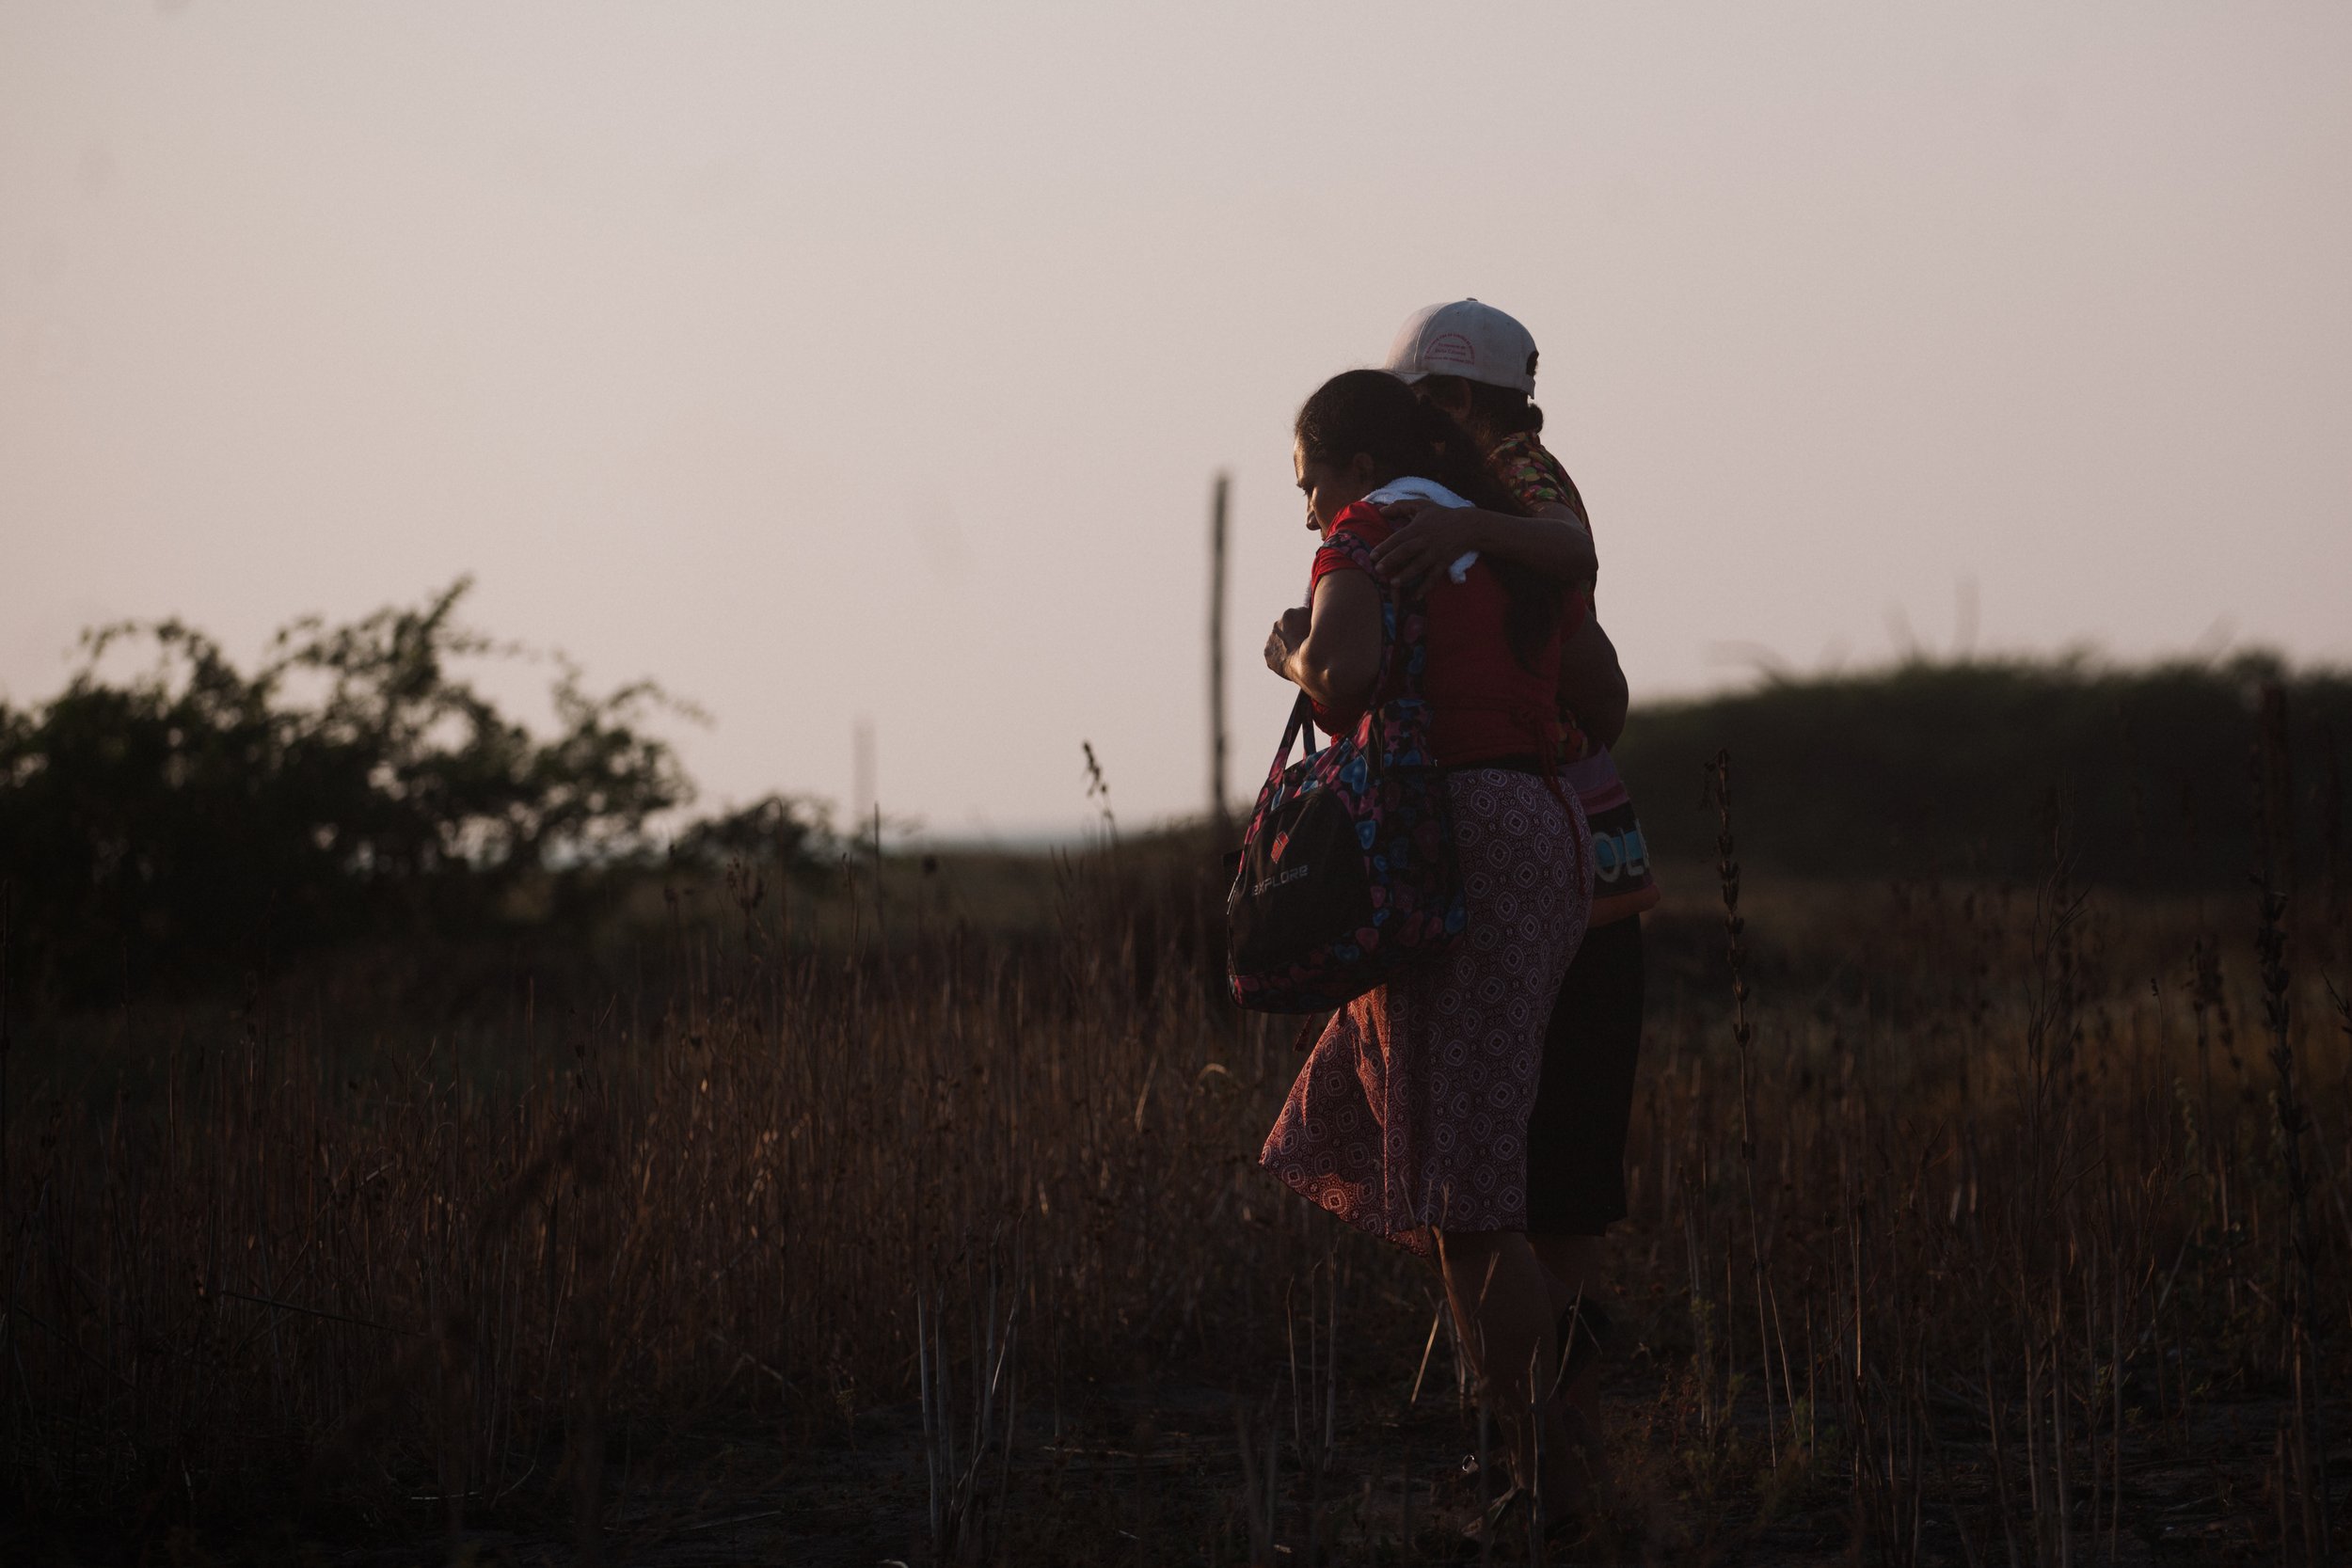  Two mothers find comfort in each other's embrace as they walk back to the caravan after a long and exhausting day of traveling. 